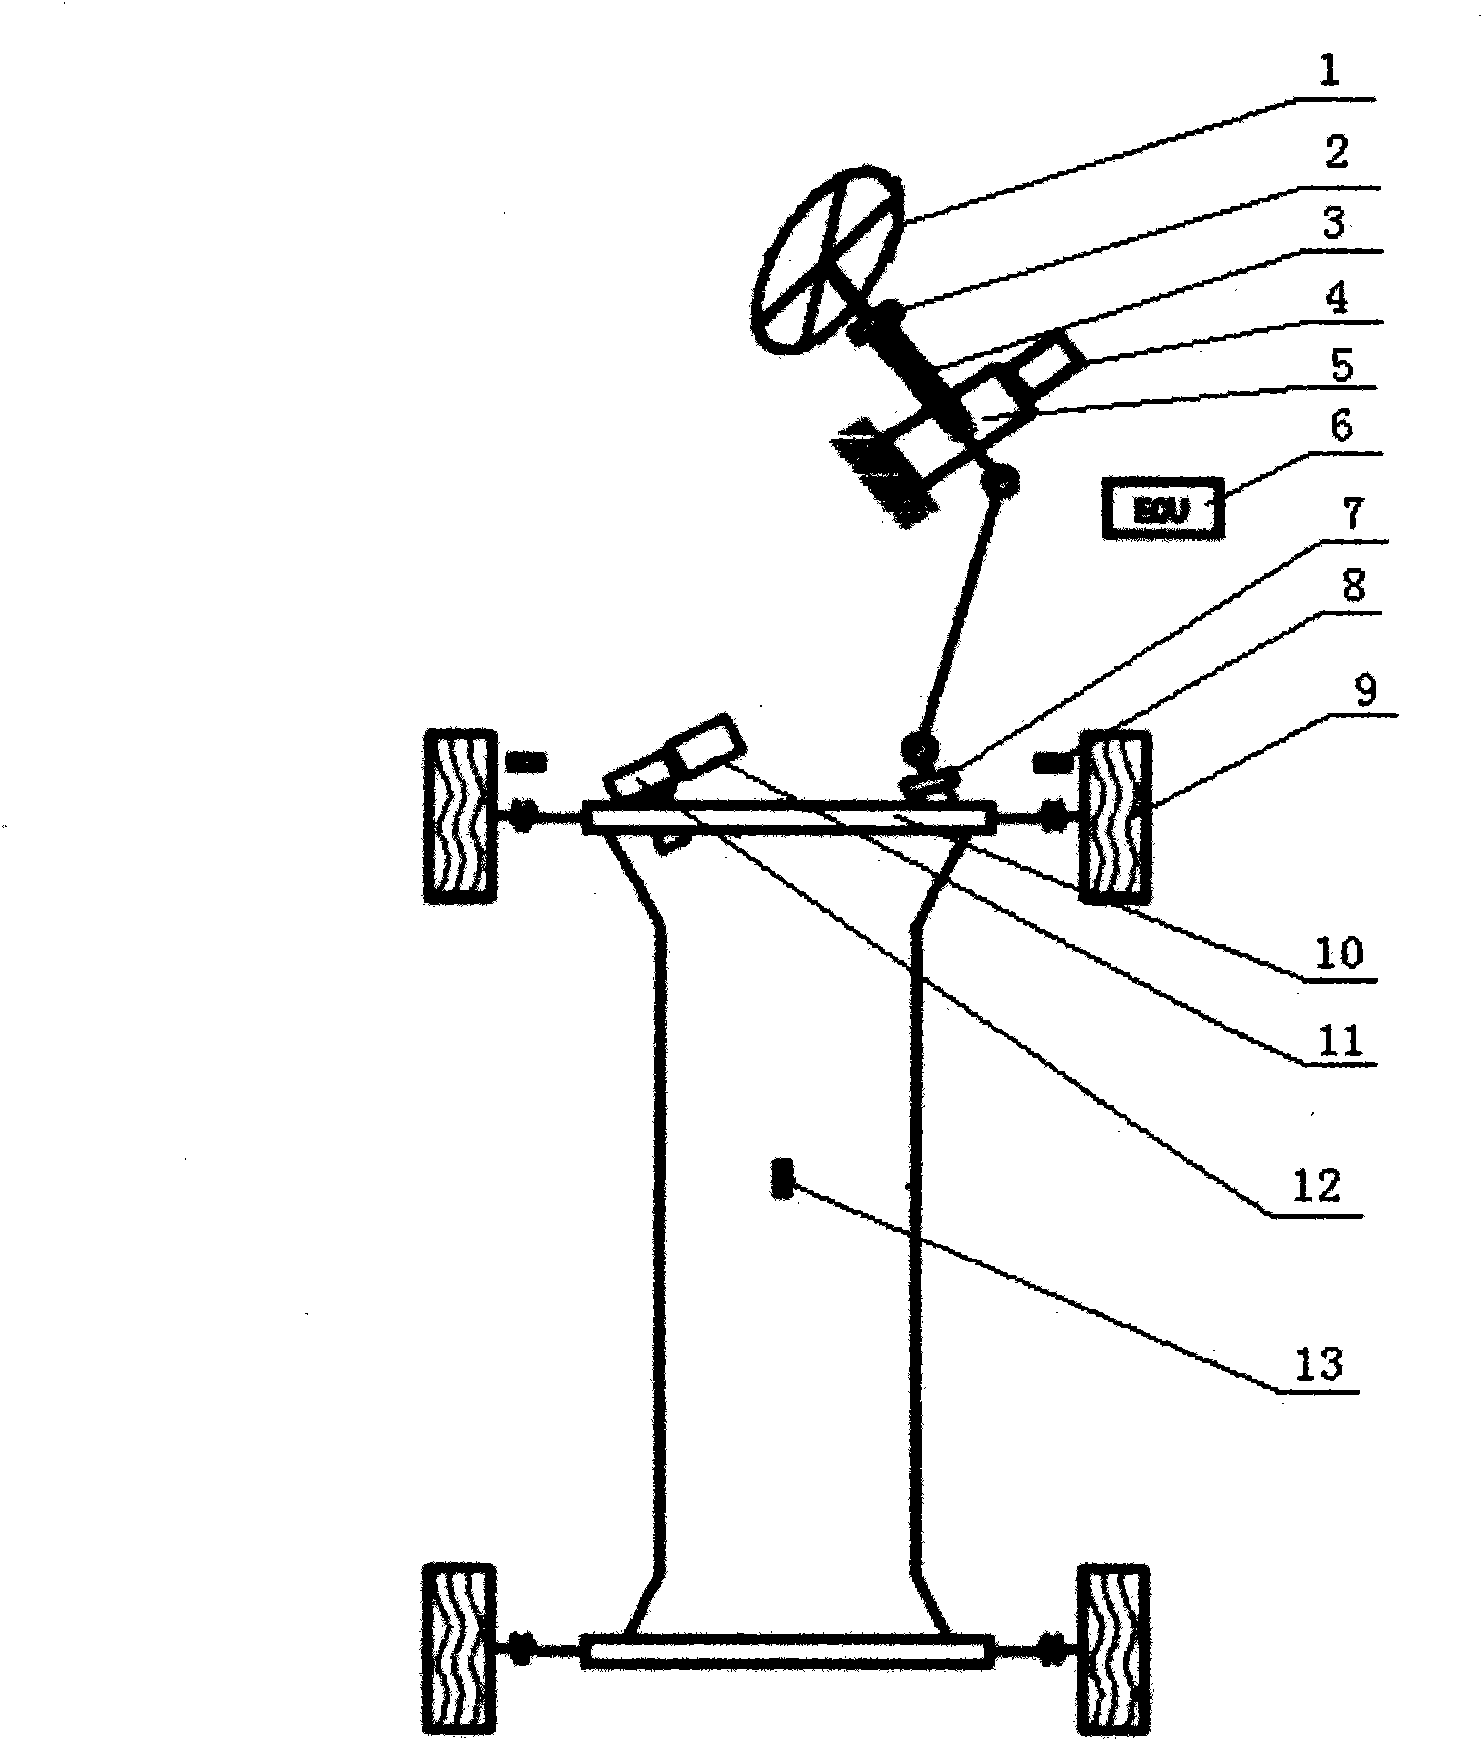 Active electric power steering system capable of changing steering system transmission ratio